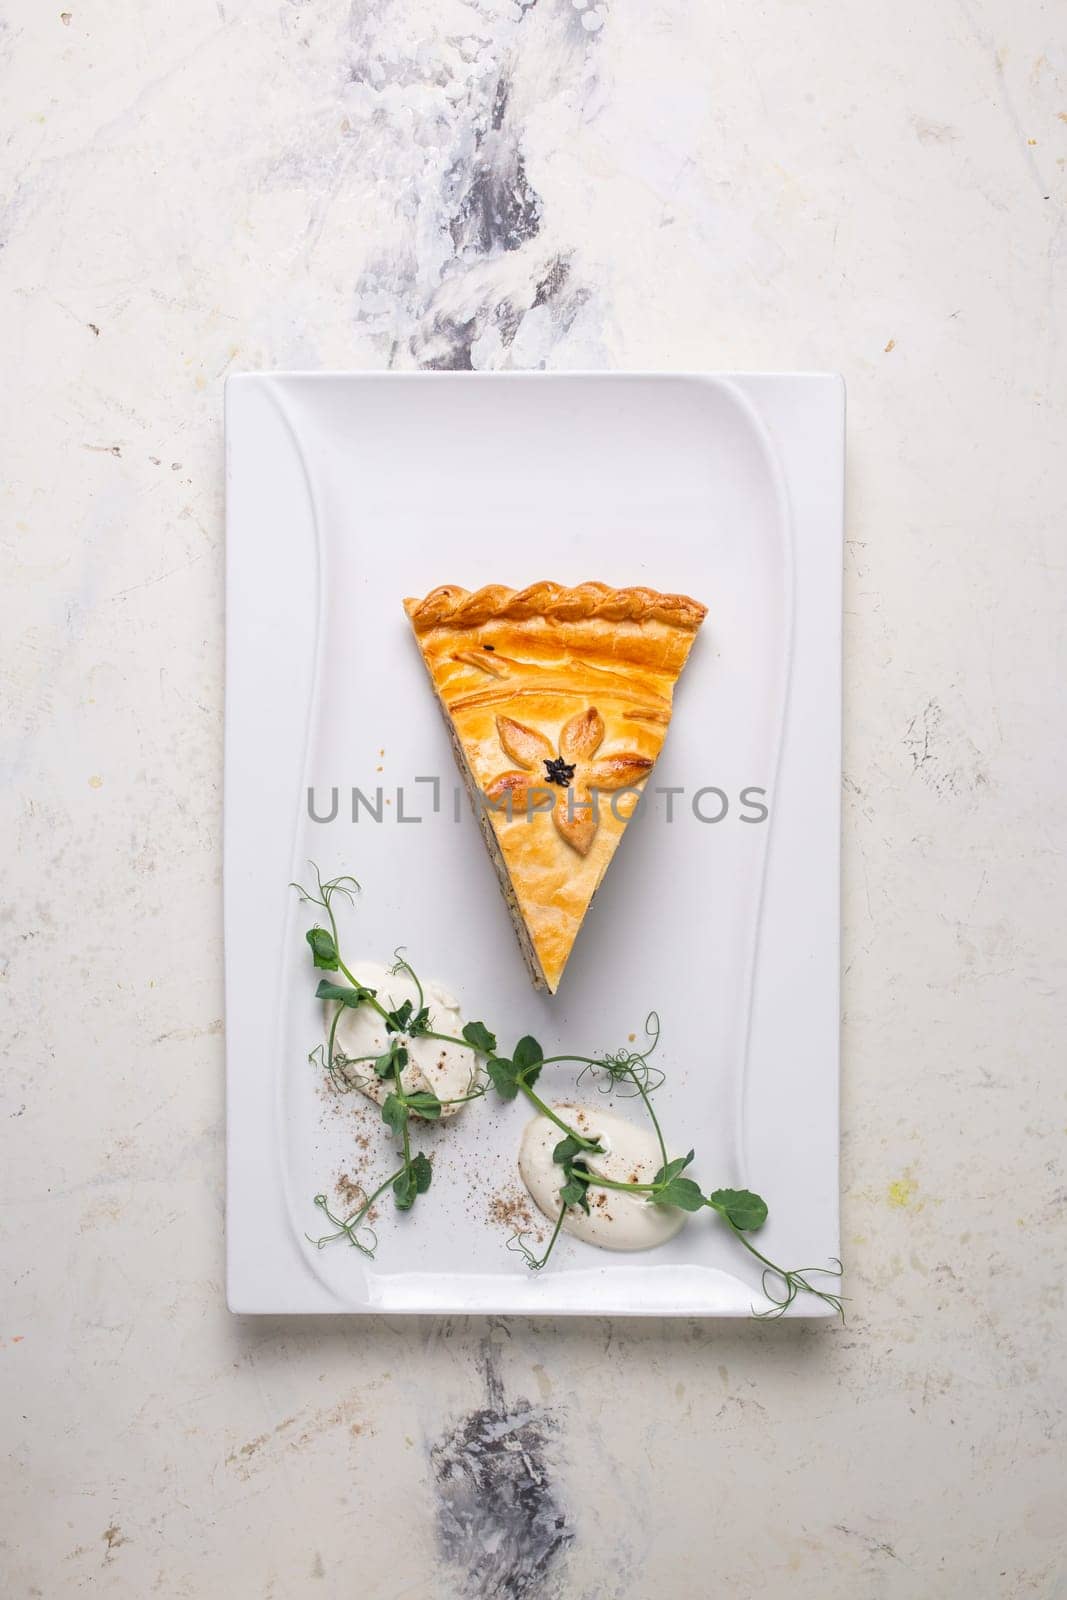 top view multi-layered meat and vegetable savory pie with a golden crust by Pukhovskiy